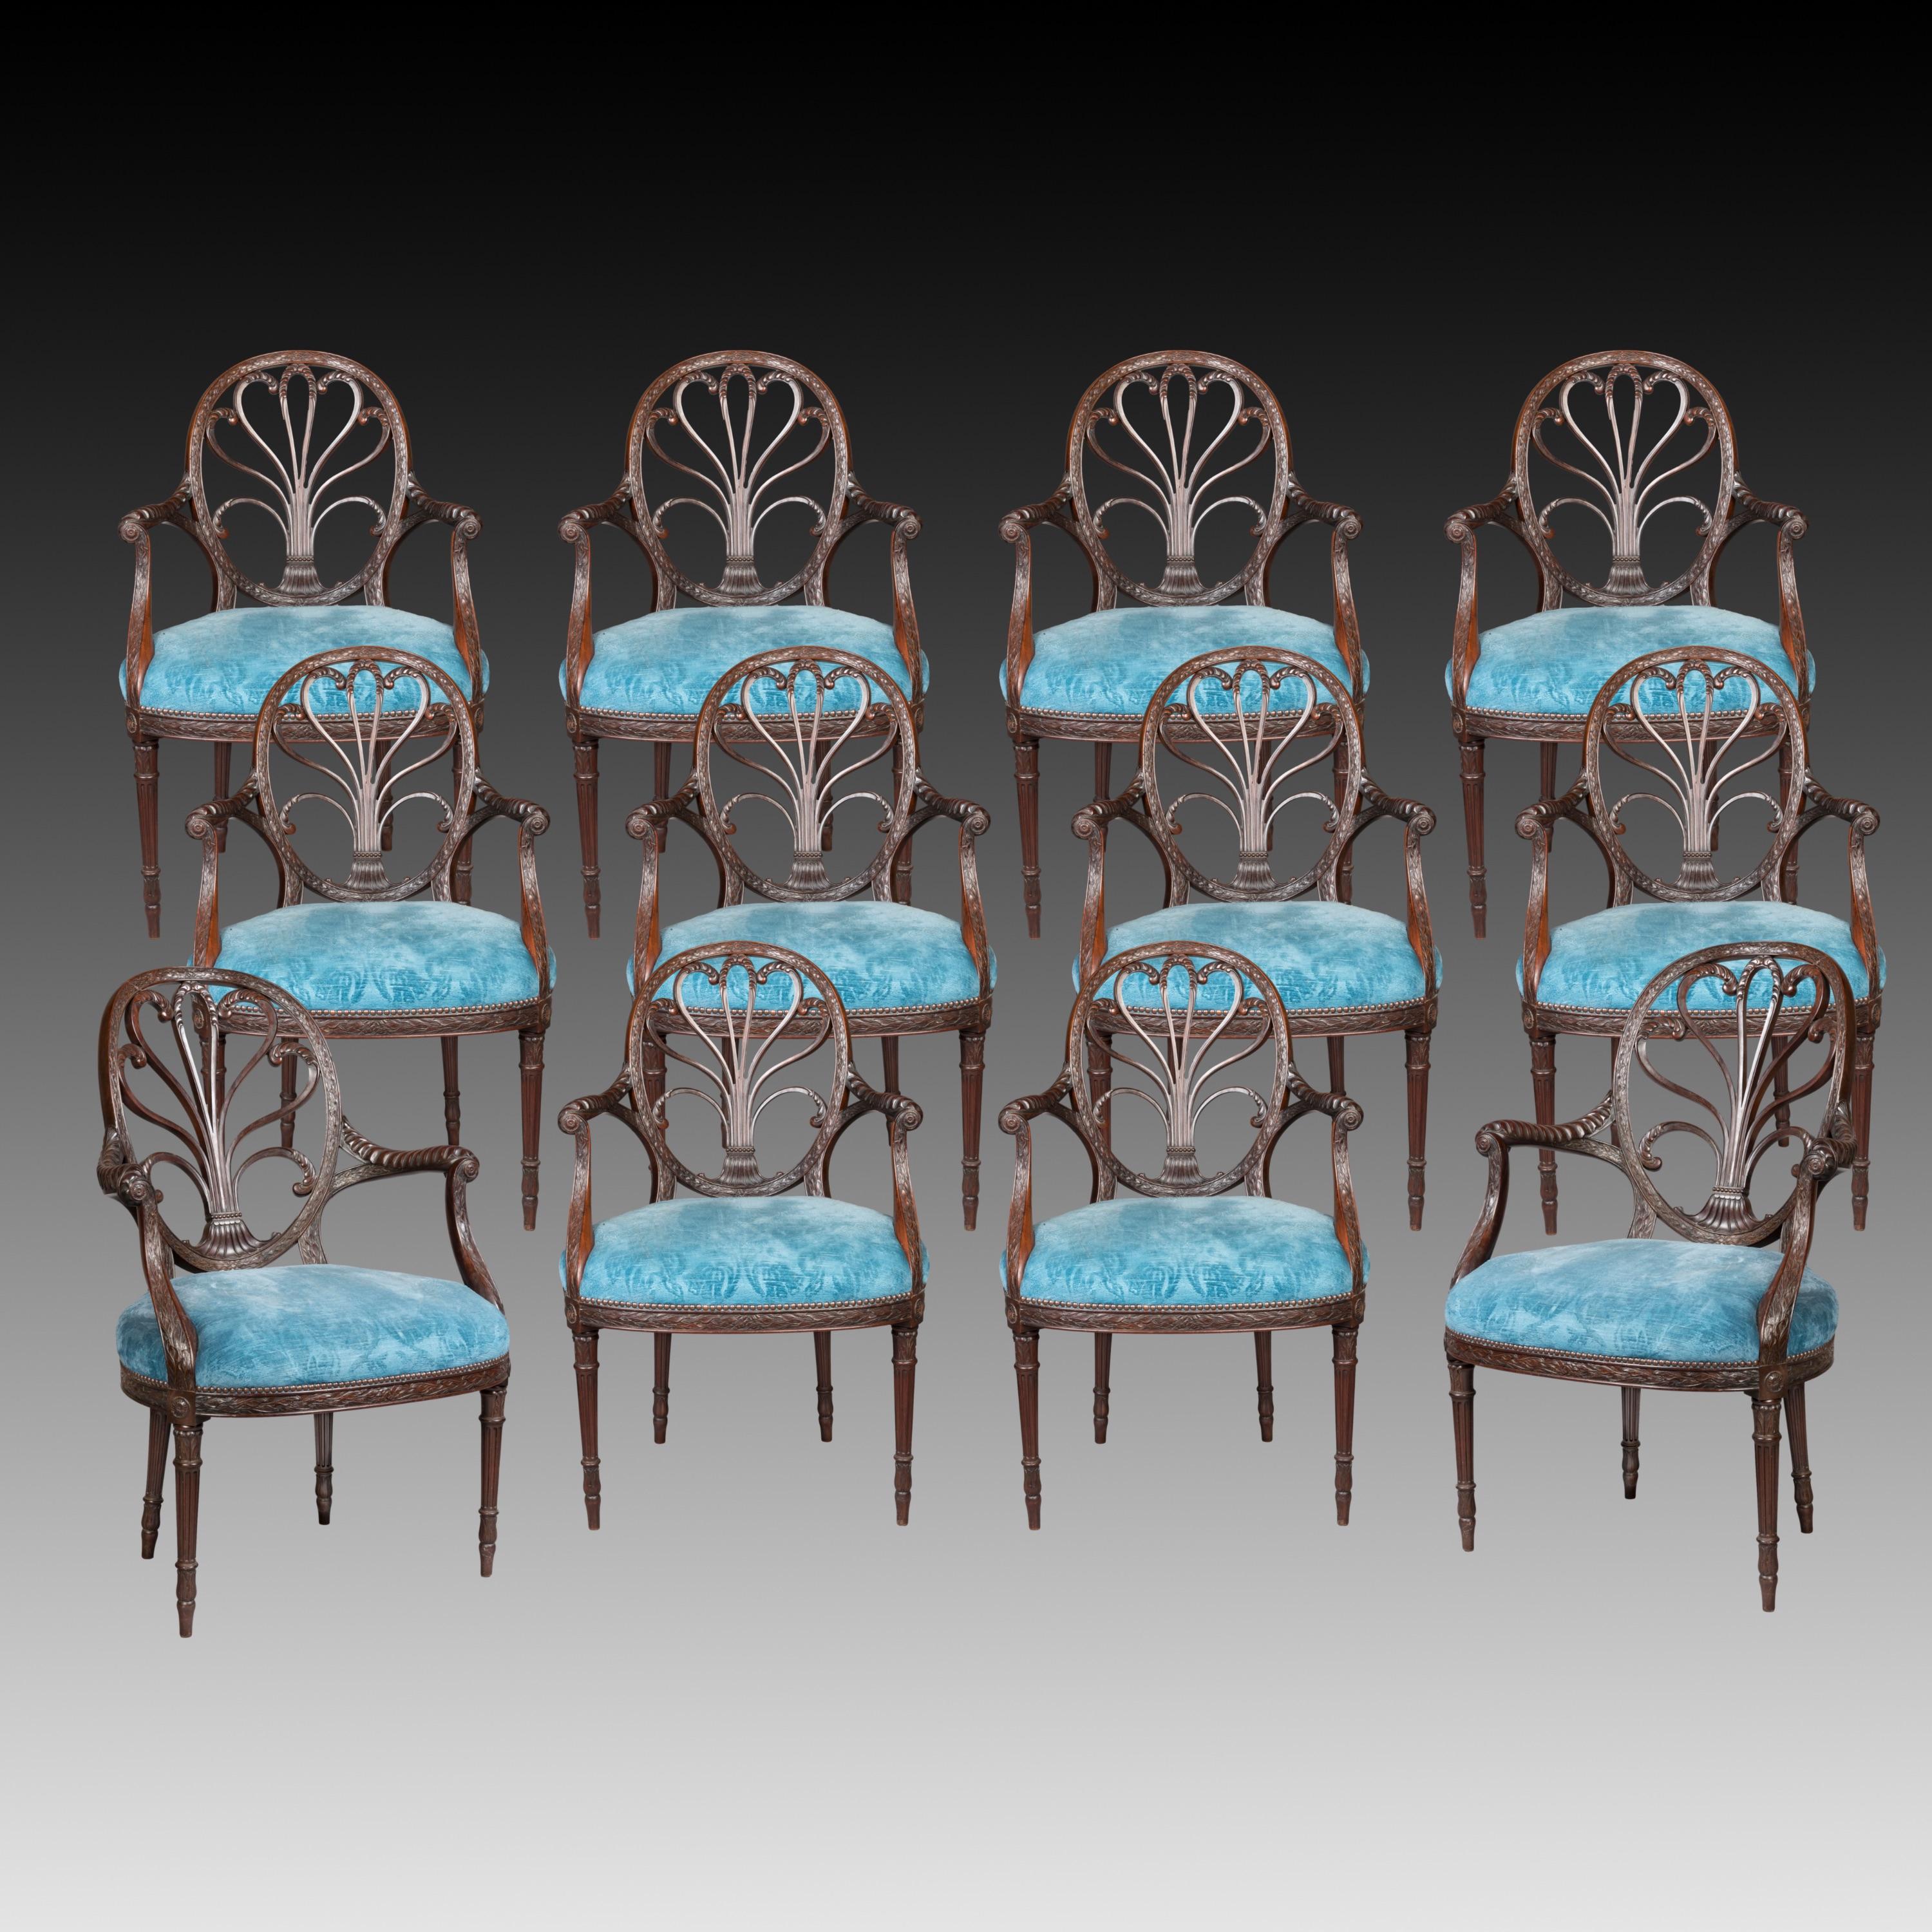 A rare set of beautifully drawn proportions with two larger armchairs and ten of smaller scale, all carved from mahogany, rising from tapering and fluted ring turned front legs, with bands of palm fronds atop, and canted rear legs; the bowed front